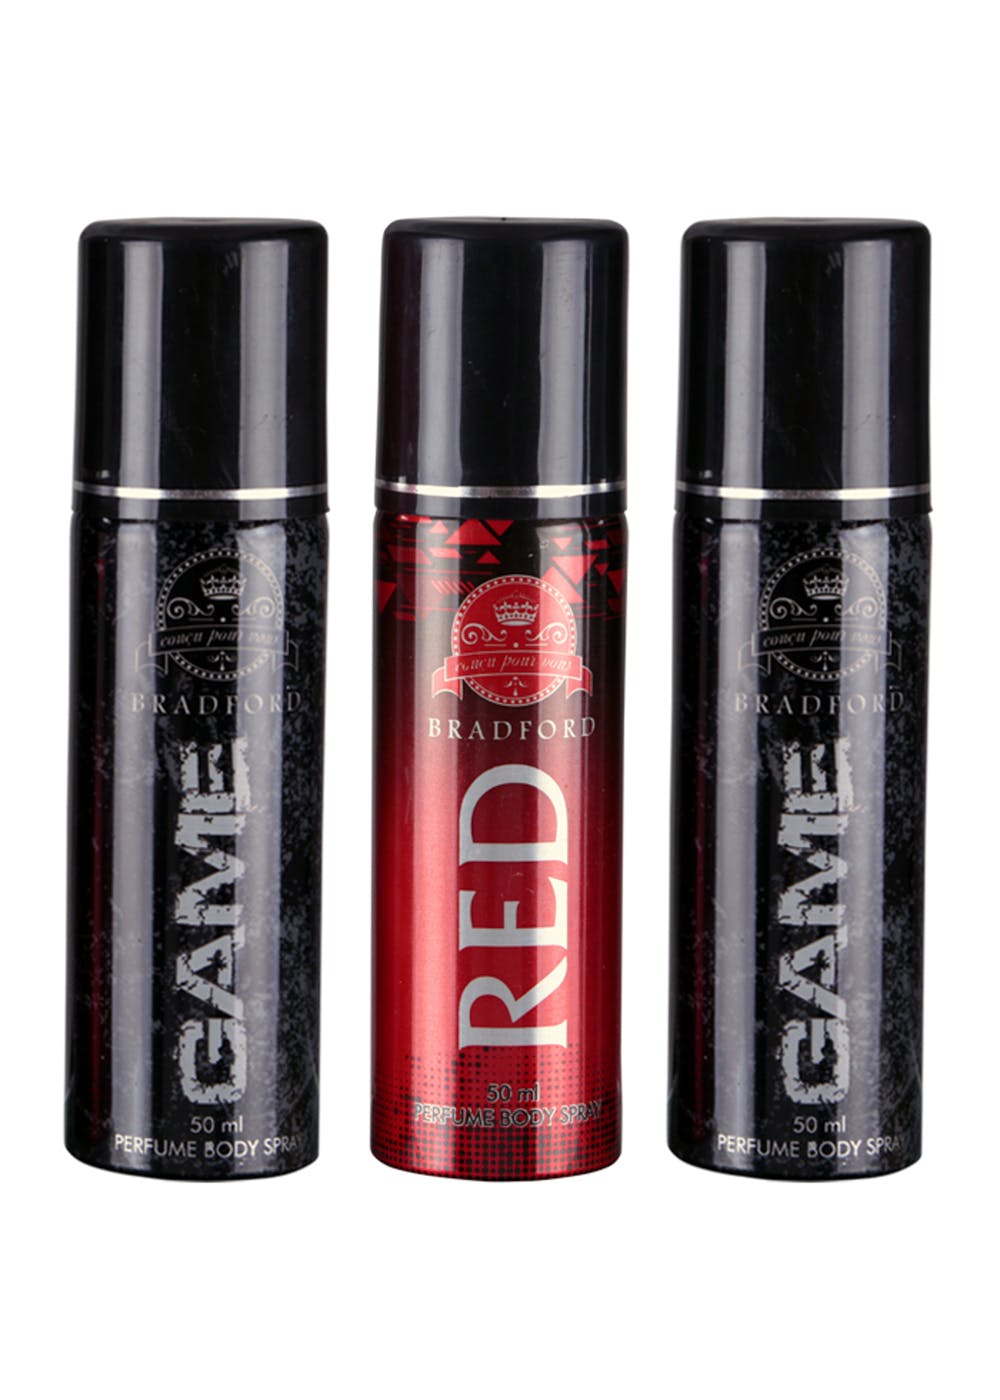 Combo of 2 Game & 1 Red Perfume Body Spray - For Men